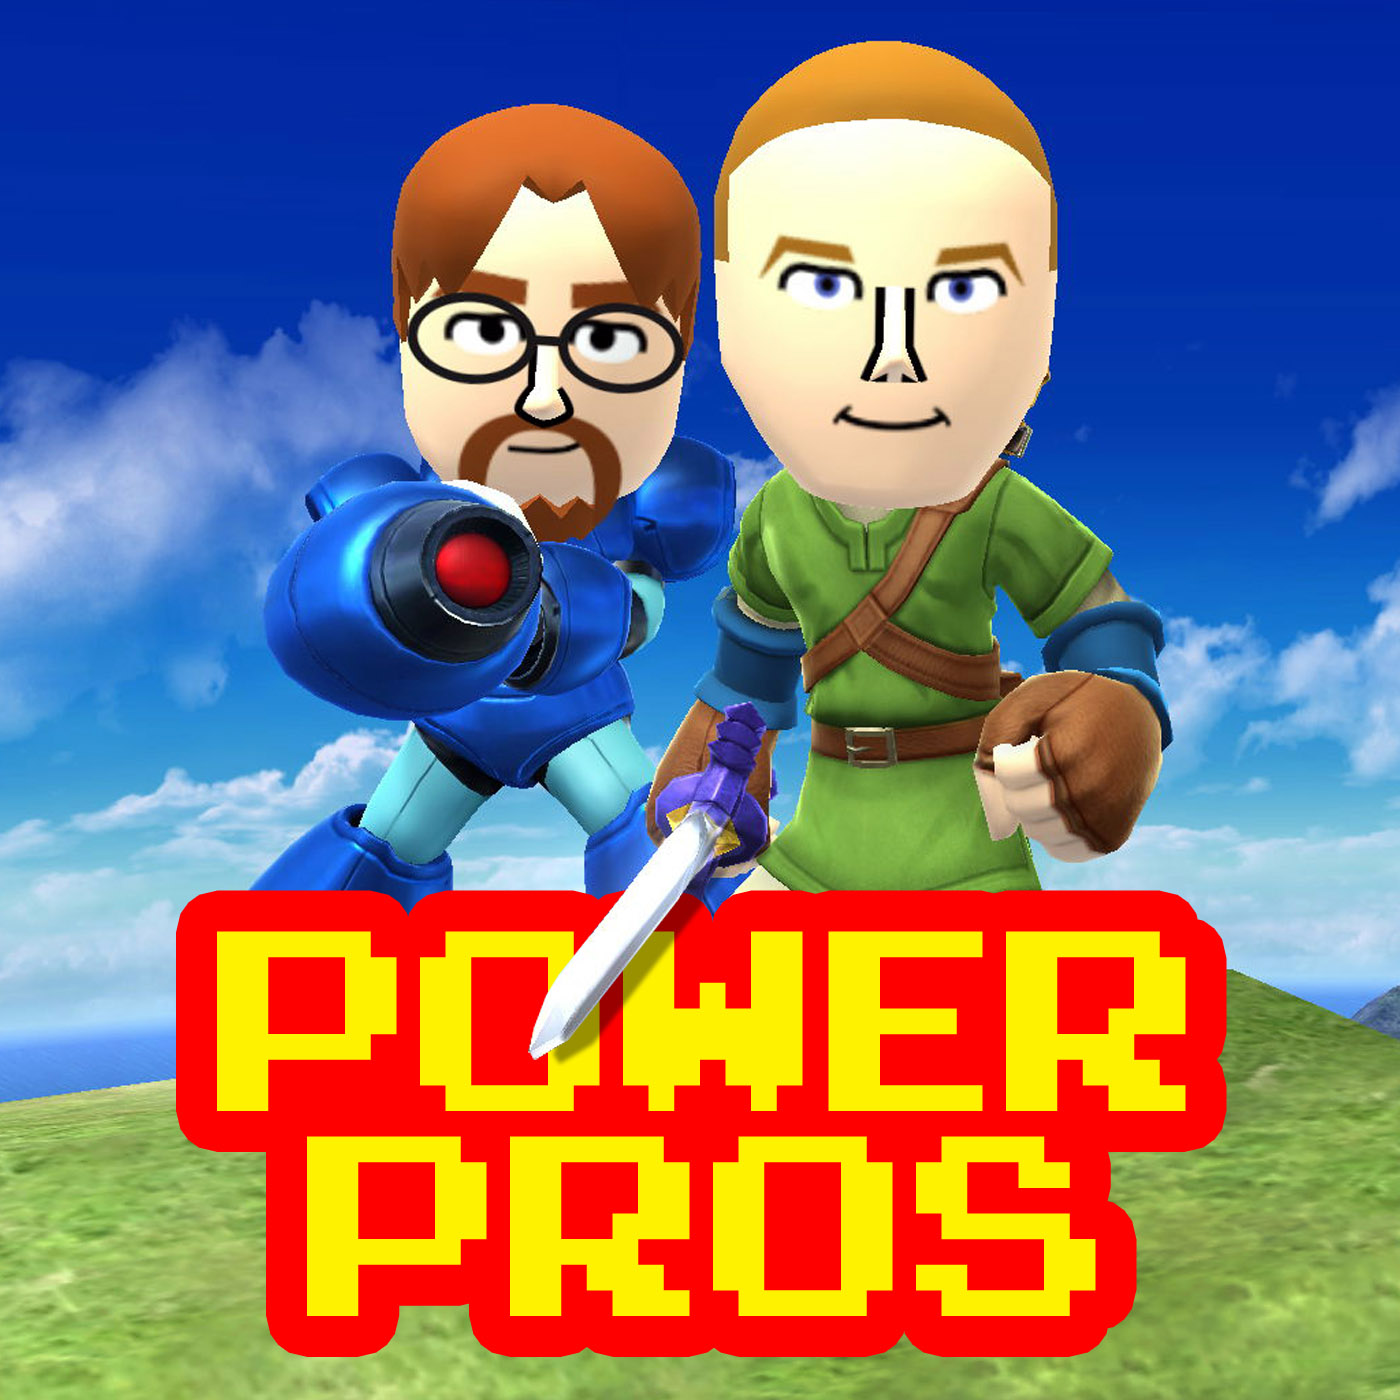 Announcing the Power Pros Podcast!